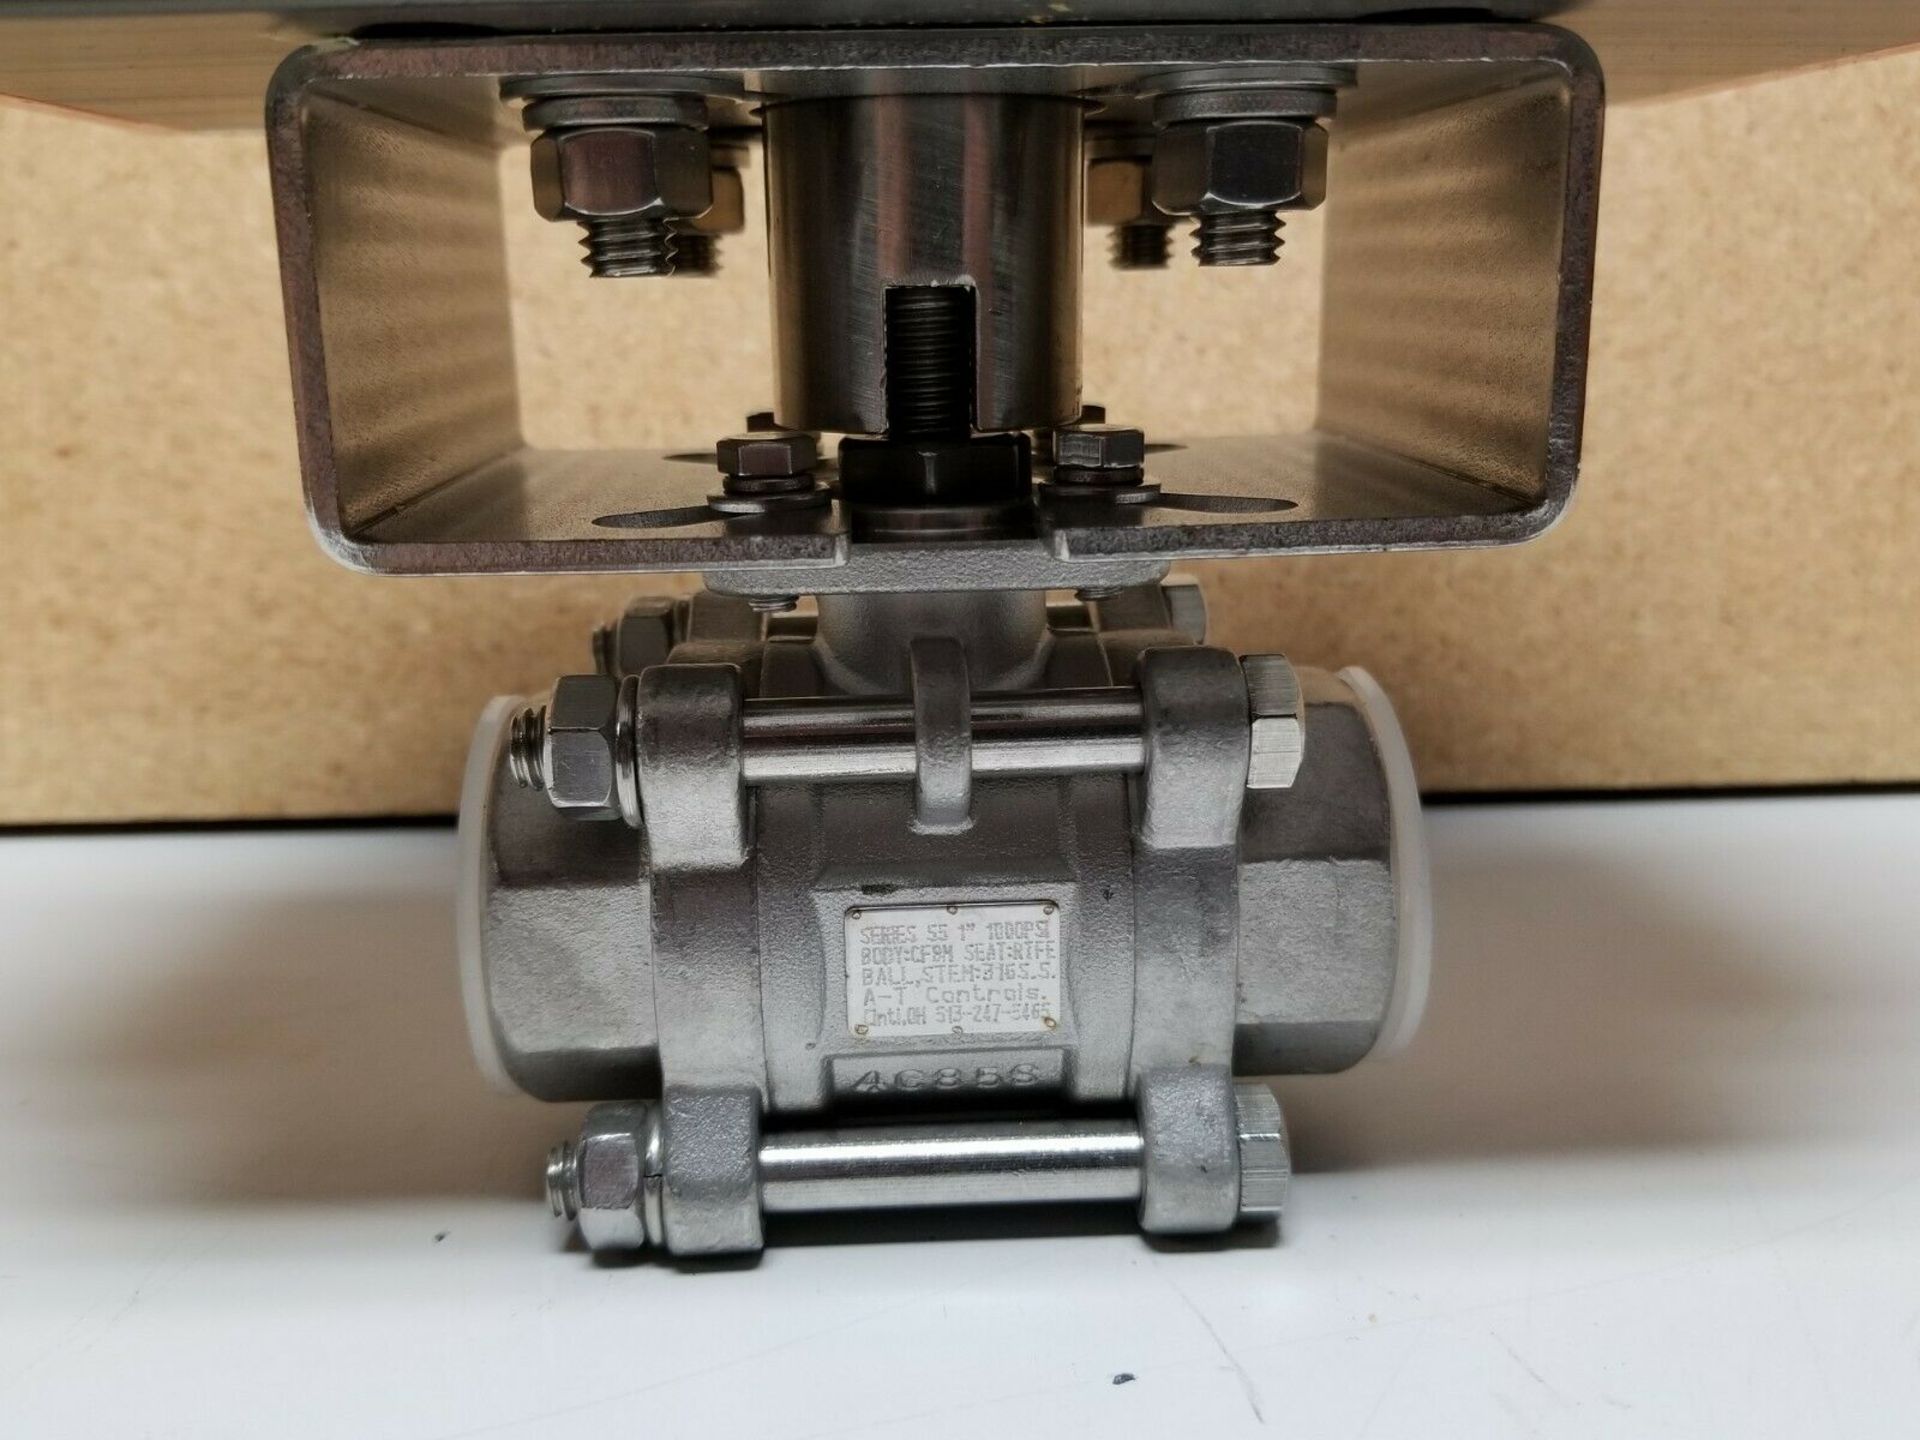 NEW AT 1" 316 STAINLESS STEEL BALL VALVE WITH TRIAC ACTUATOR - Image 3 of 10